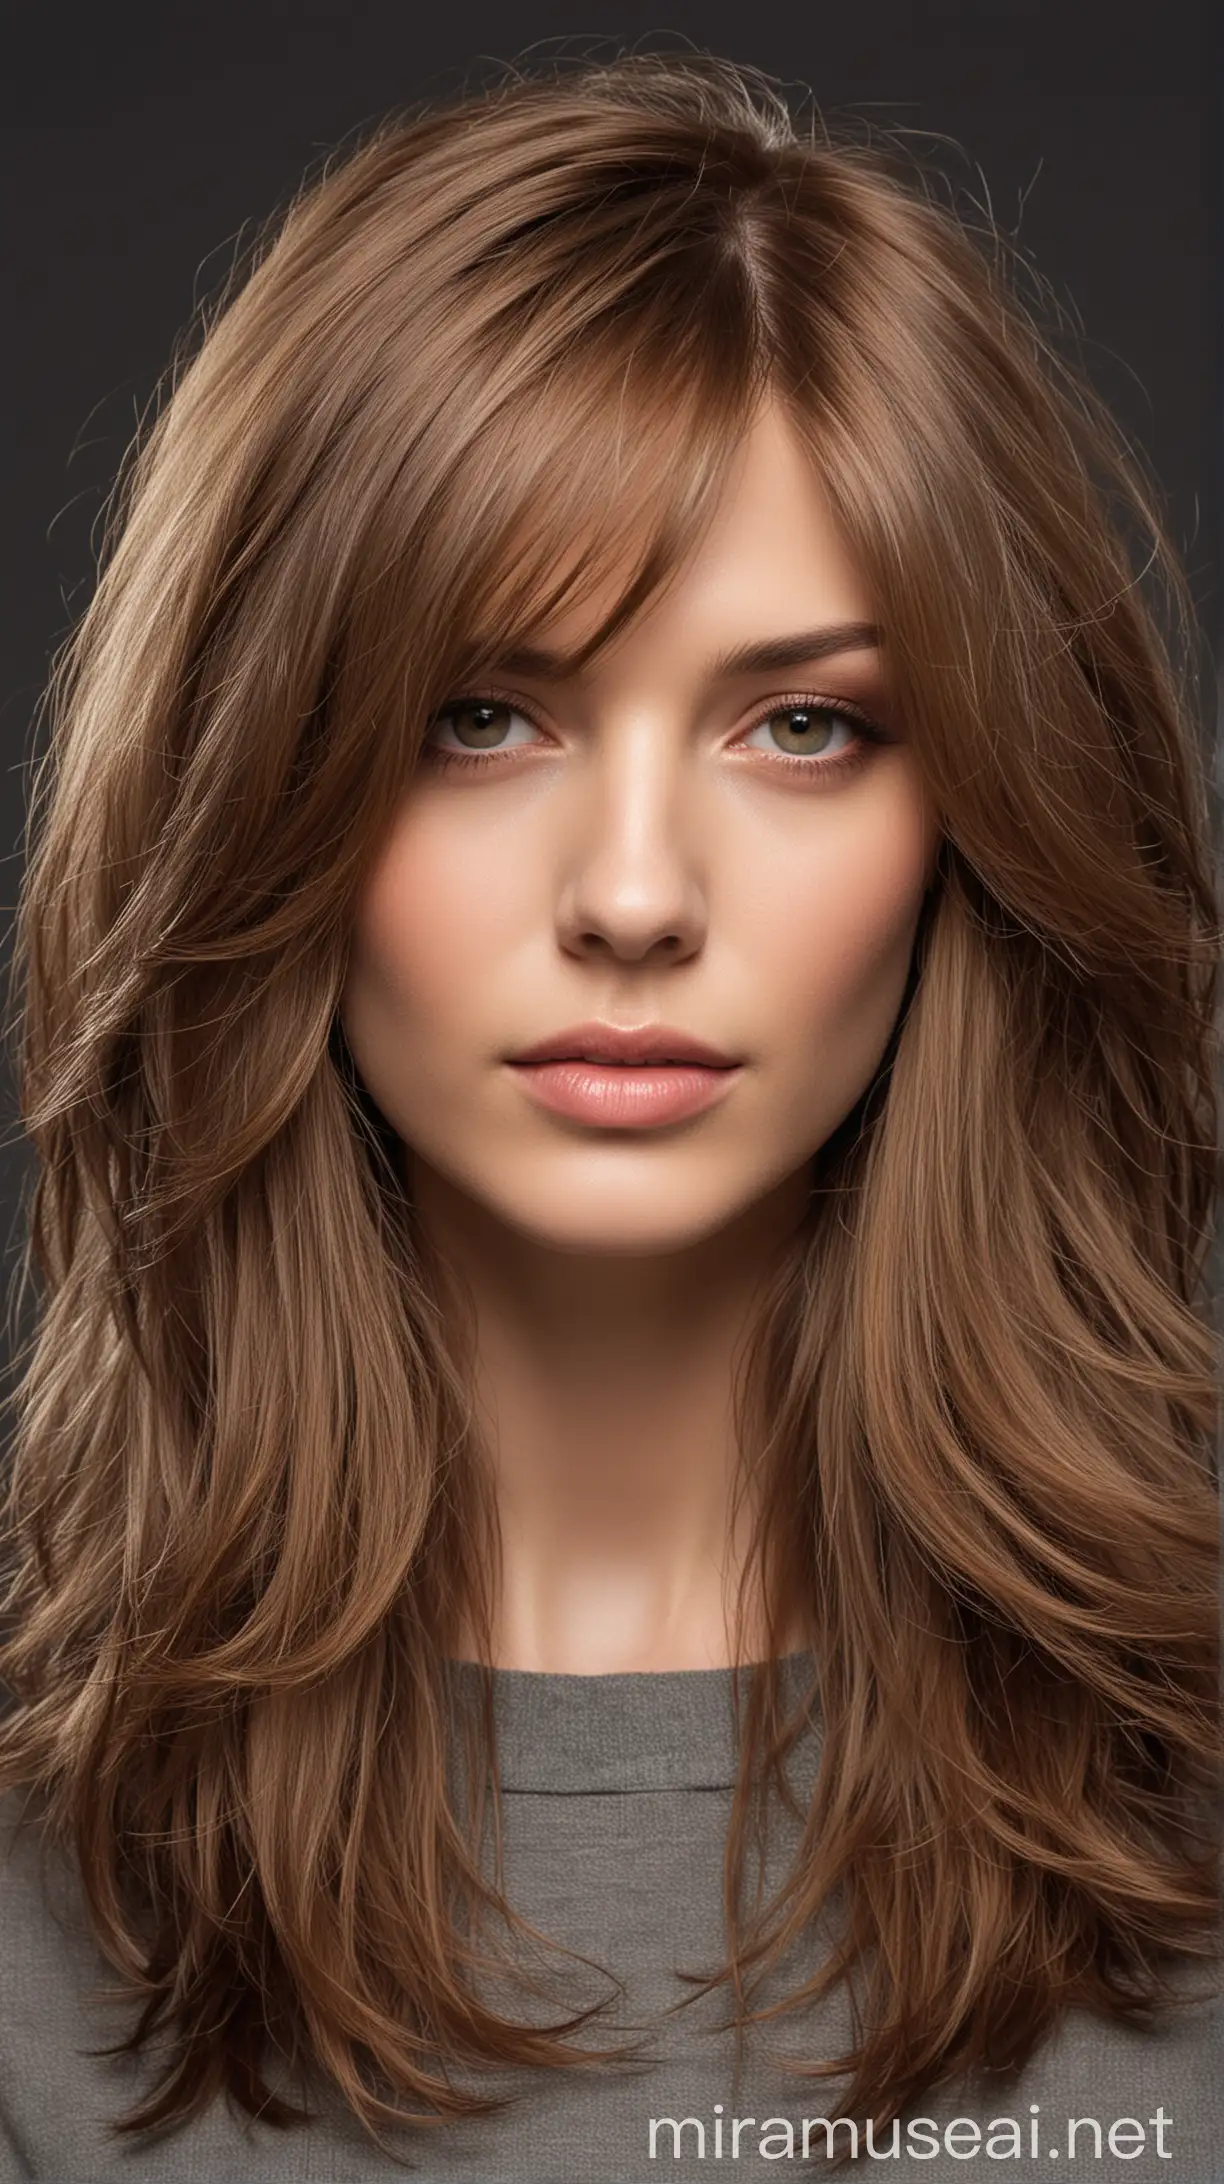 Spectacular Long Layers Haircut Professional Profile Model with Stunning Hairdo